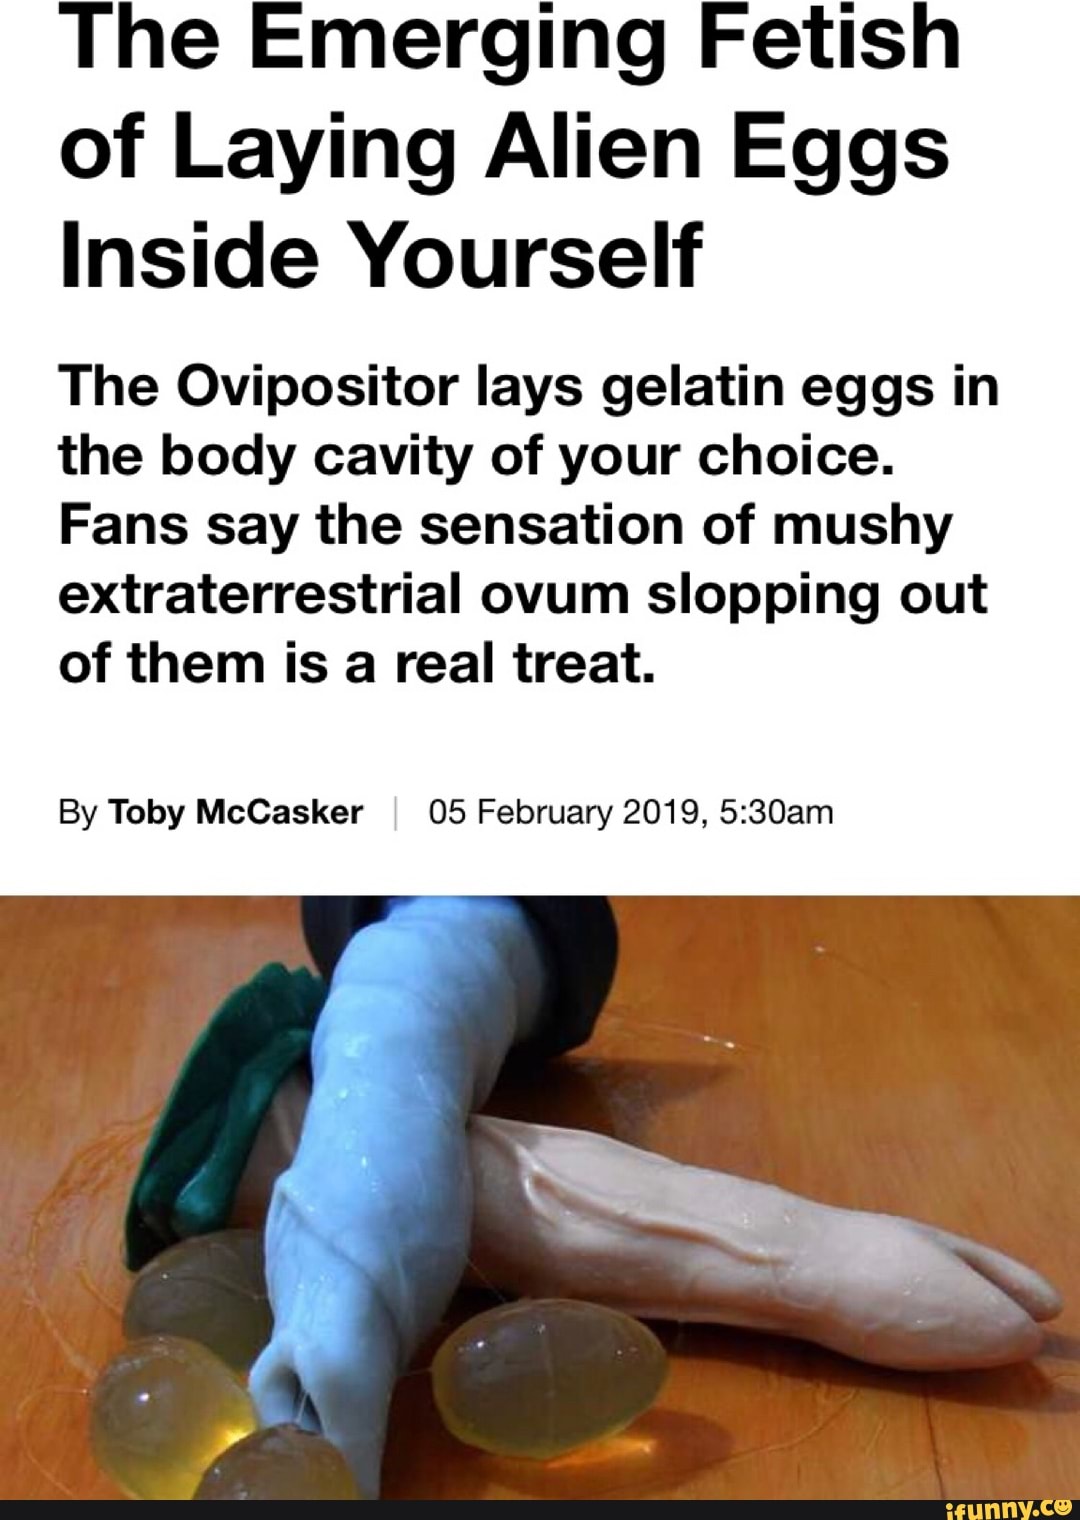 The Emerging Fetish Of Laying Alien Eggs Inside Yourself The Ovipositor Lays Gelatin Eggs In The